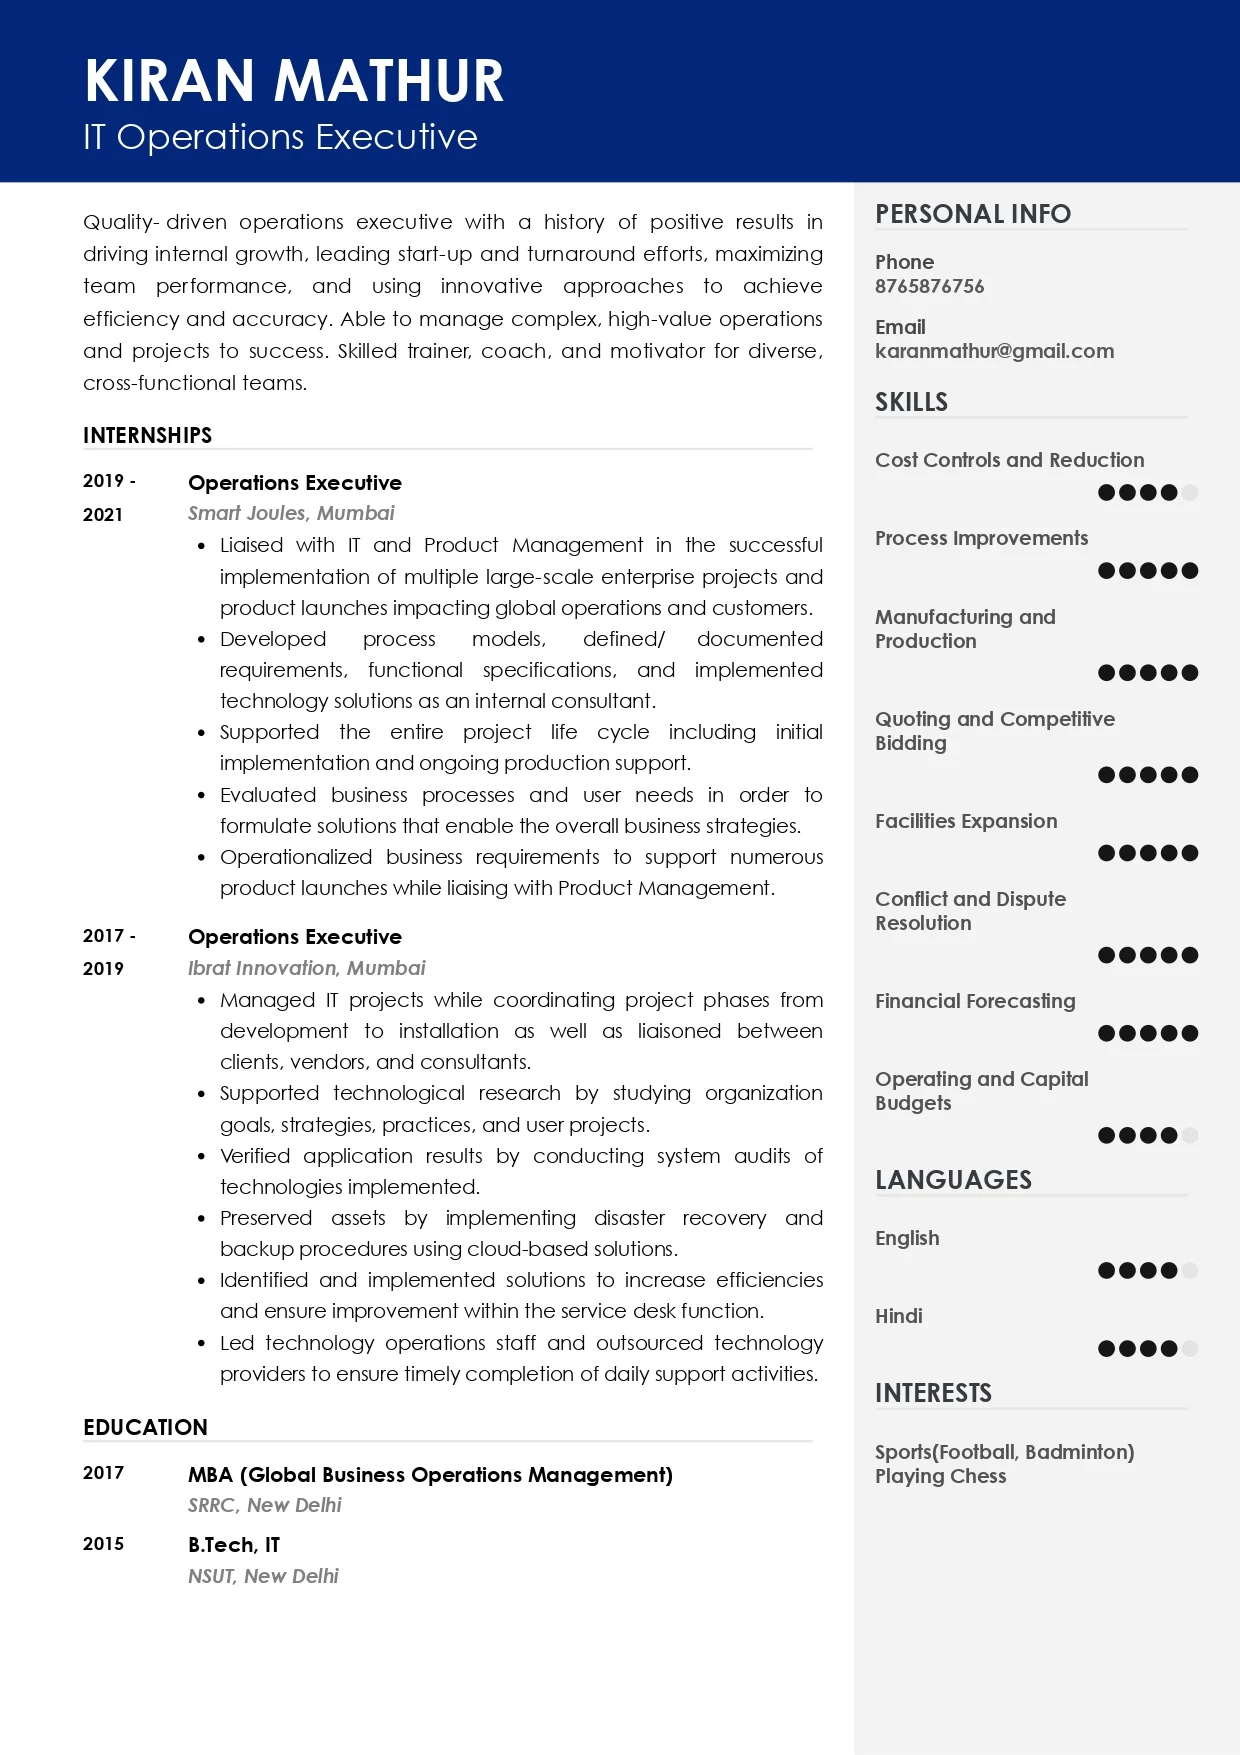 Sample Resume of IT Operations Executive | Free Resume Templates & Samples on Resumod.co